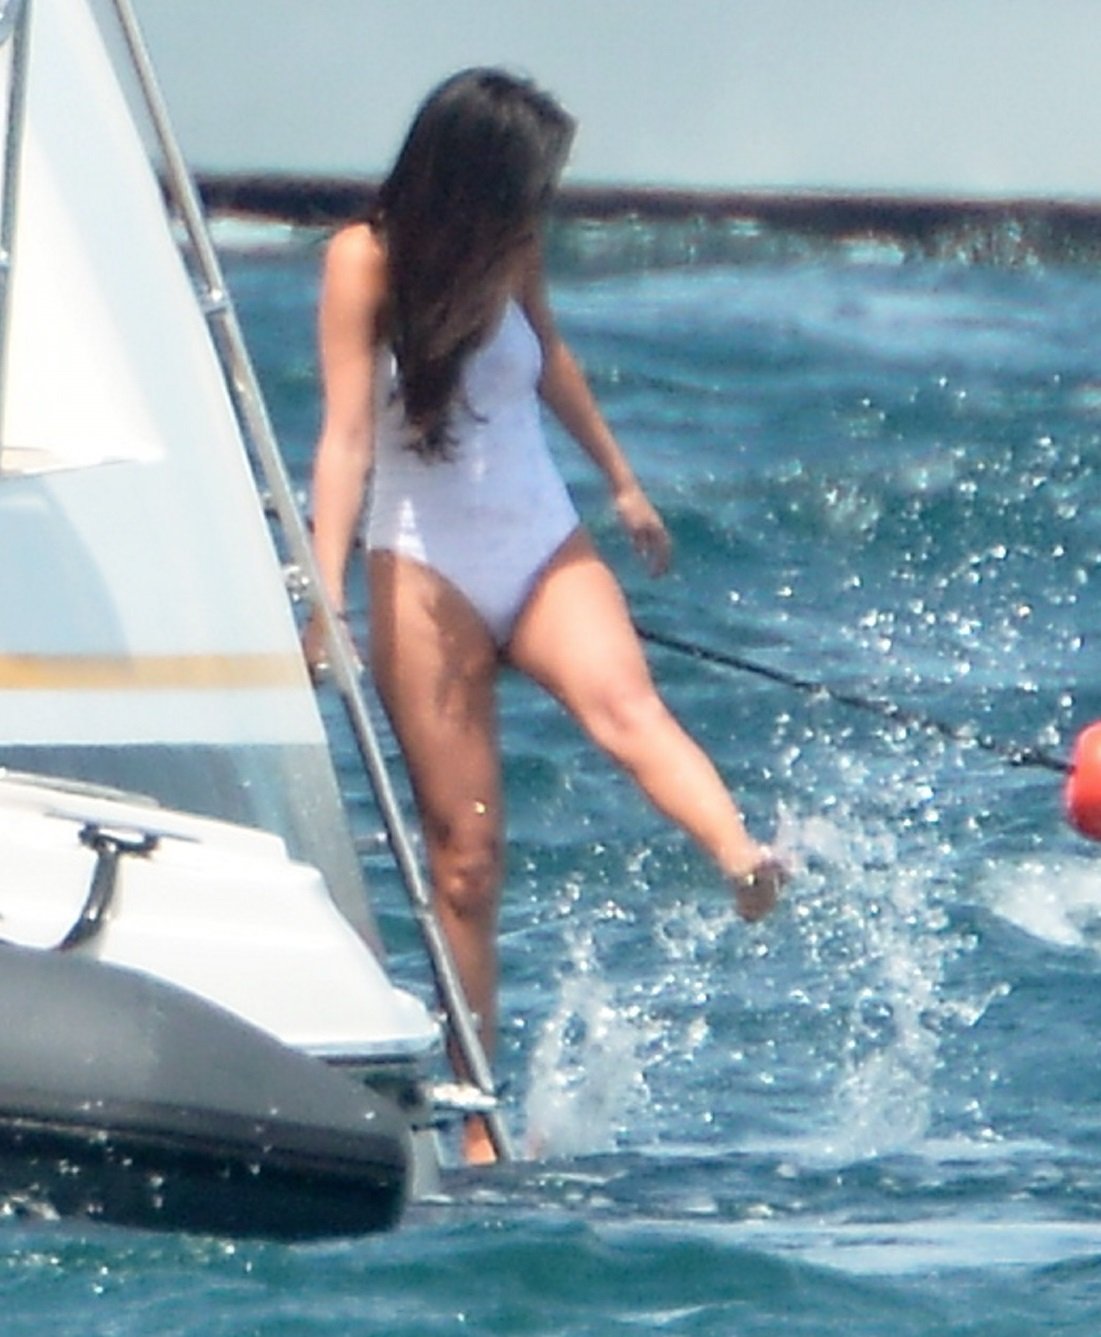 Selena Gomez On A Yacht In A Wet White Swimsuit